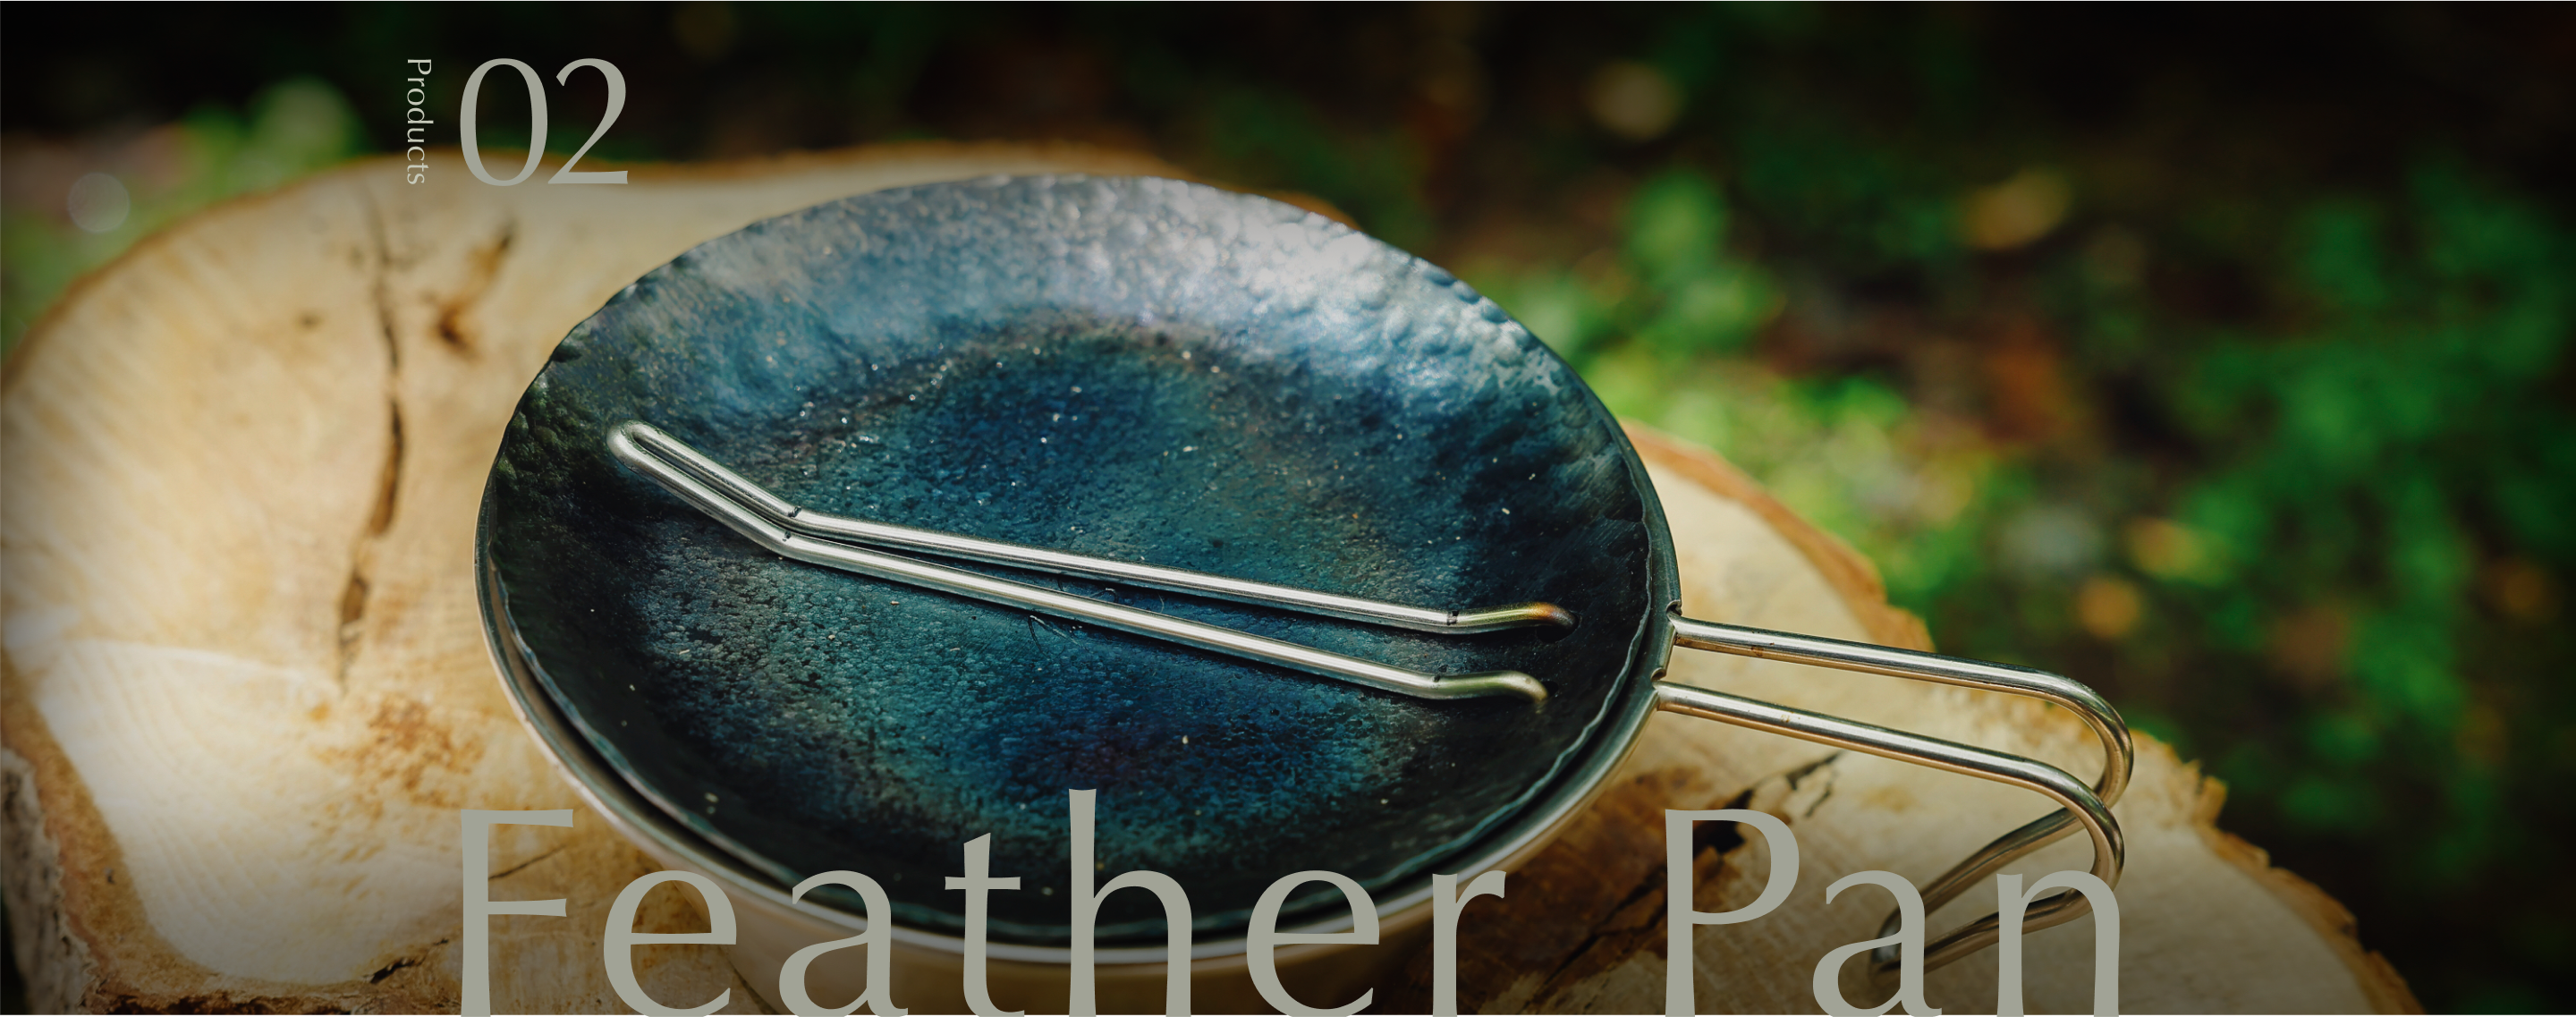 Feather Pan